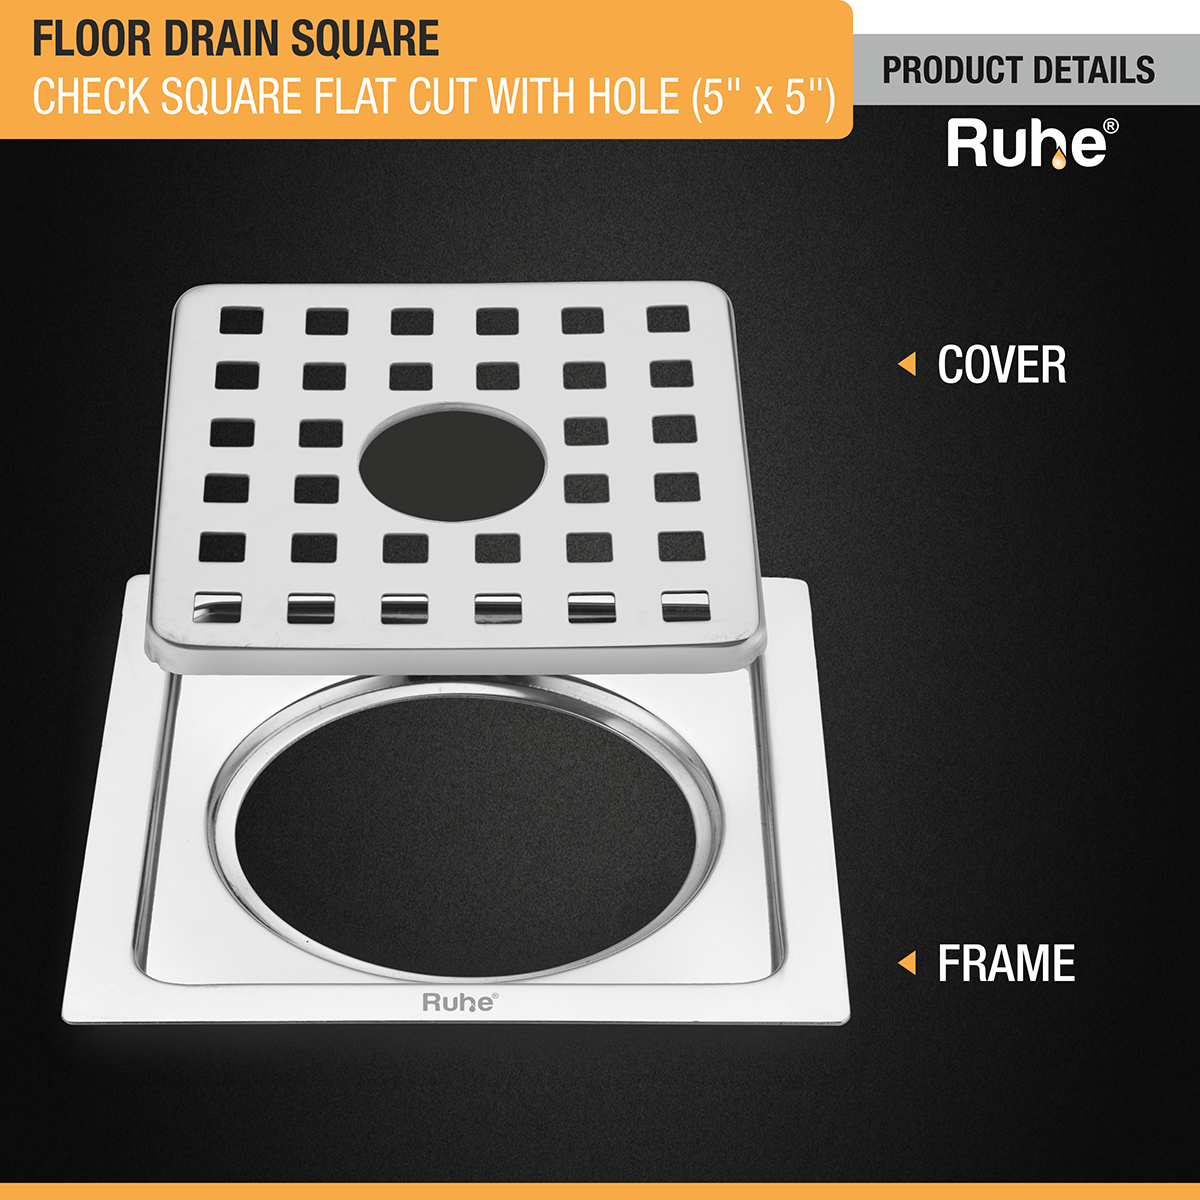 Check Floor Drain Square Flat Cut (5 x 5 Inches) with Hole product details